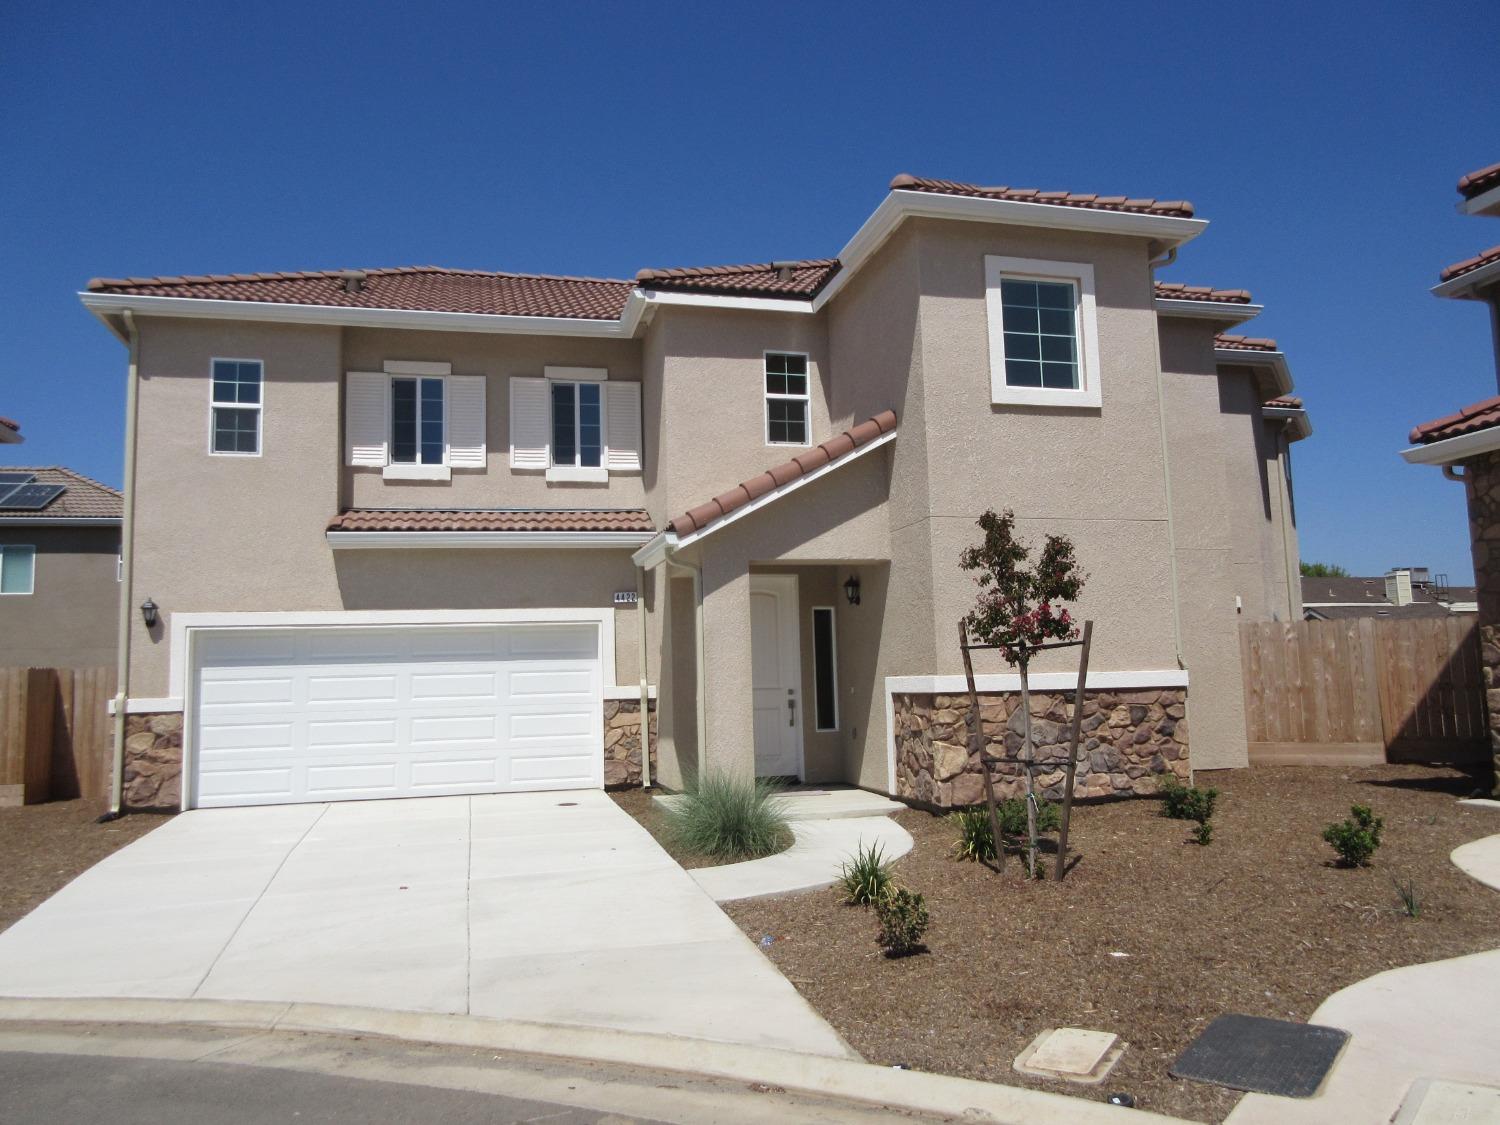 Photo of 4422 W Langden Dr #Lot14 in Fresno, CA